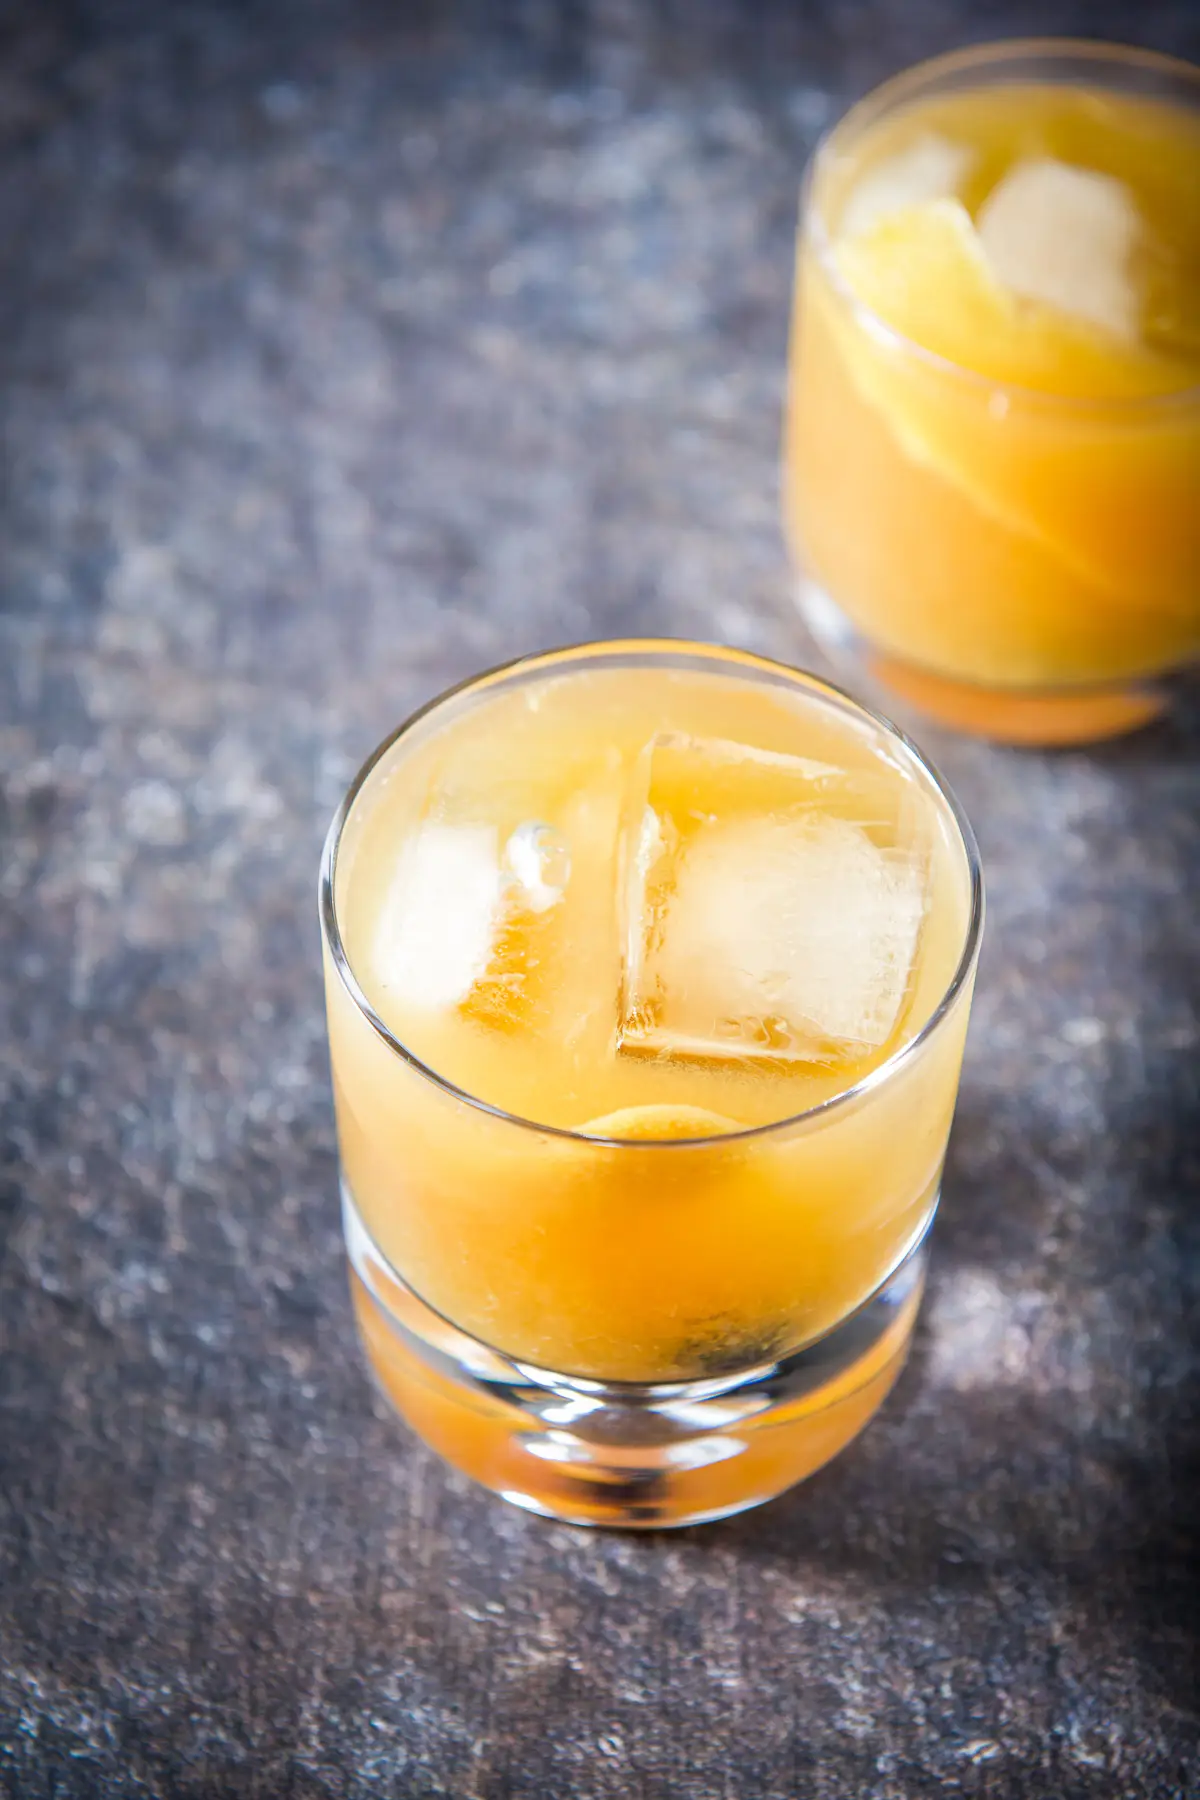 An almost overhead view of the orange juice amaretto cocktail with another in the back